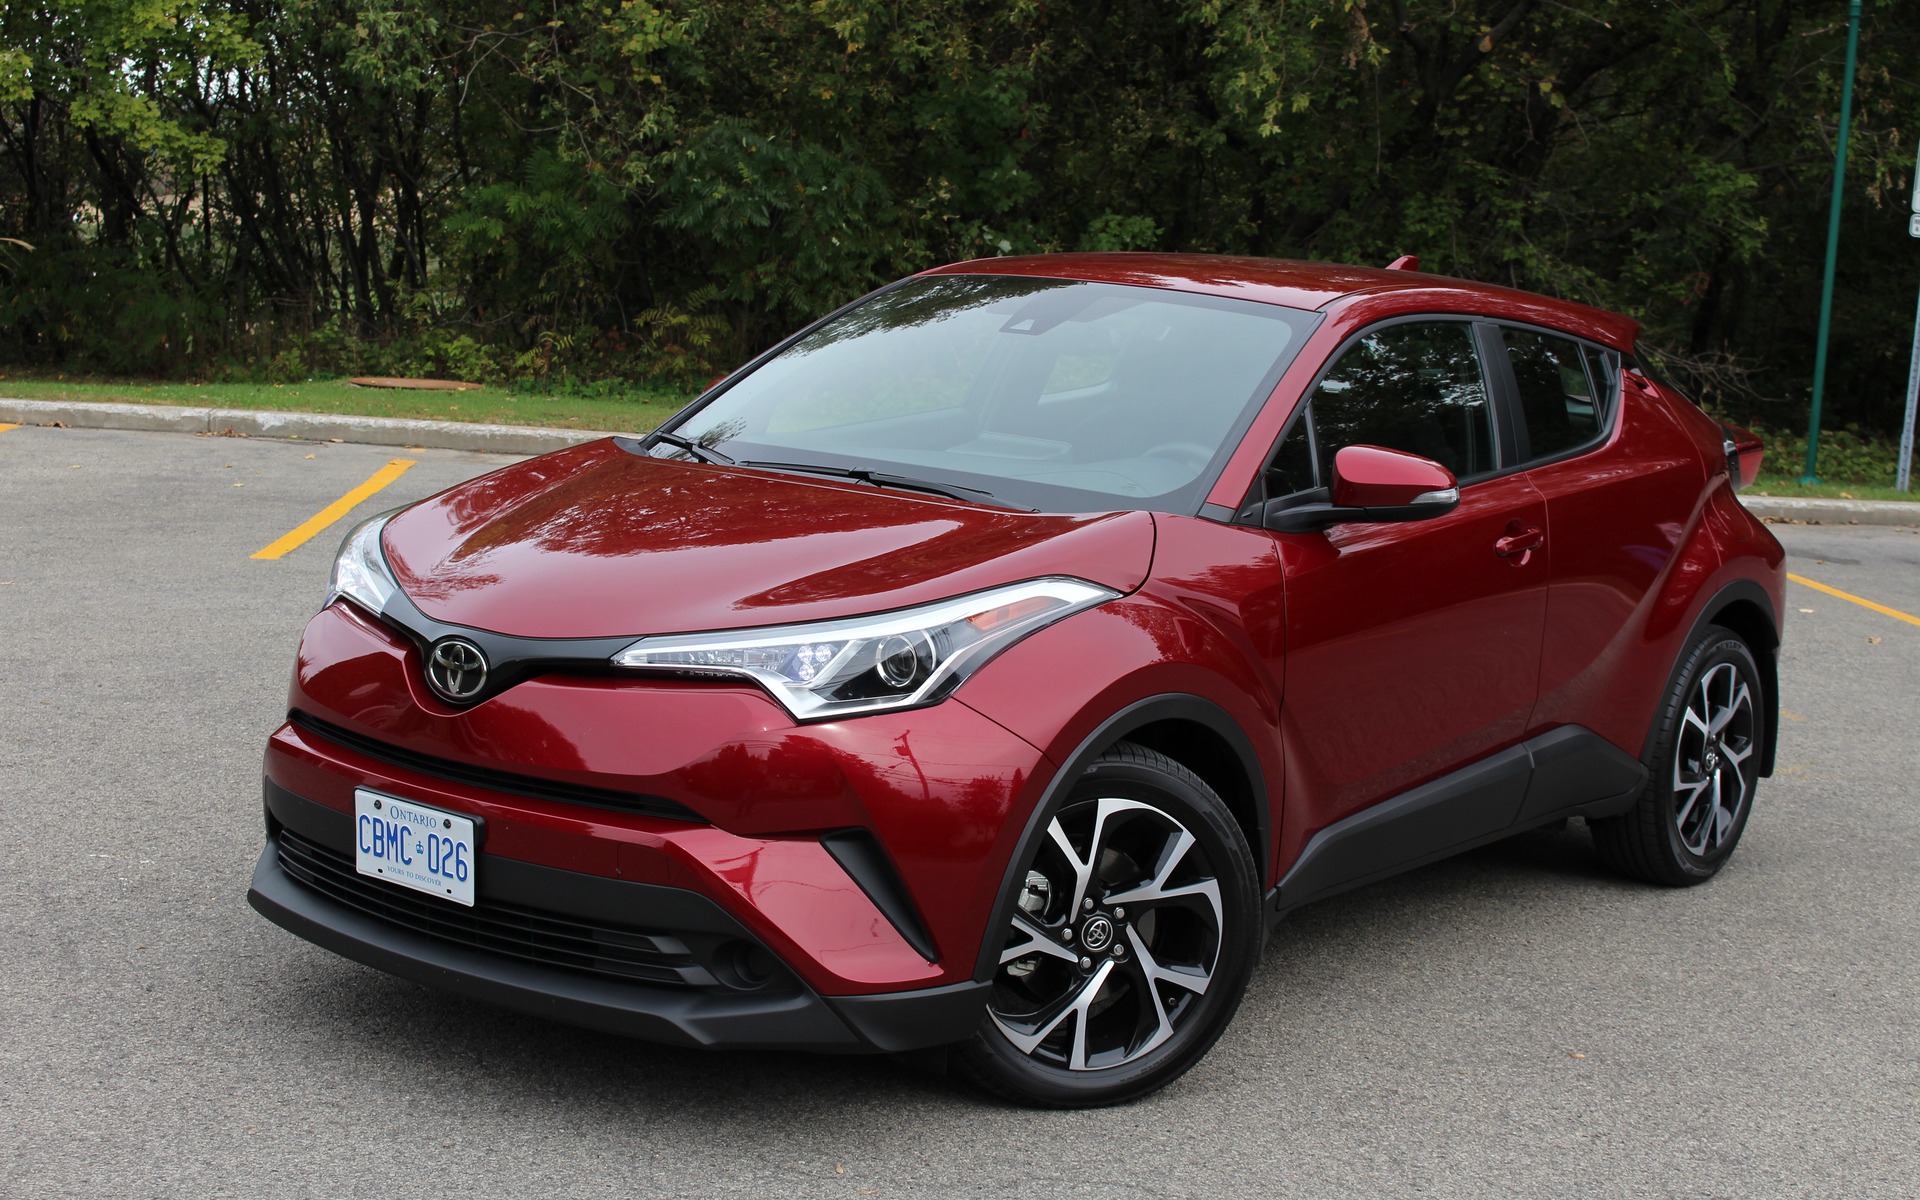 2018 Toyota C-HR: A Quirky Vehicle from a Conventional Brand - The Car Guide